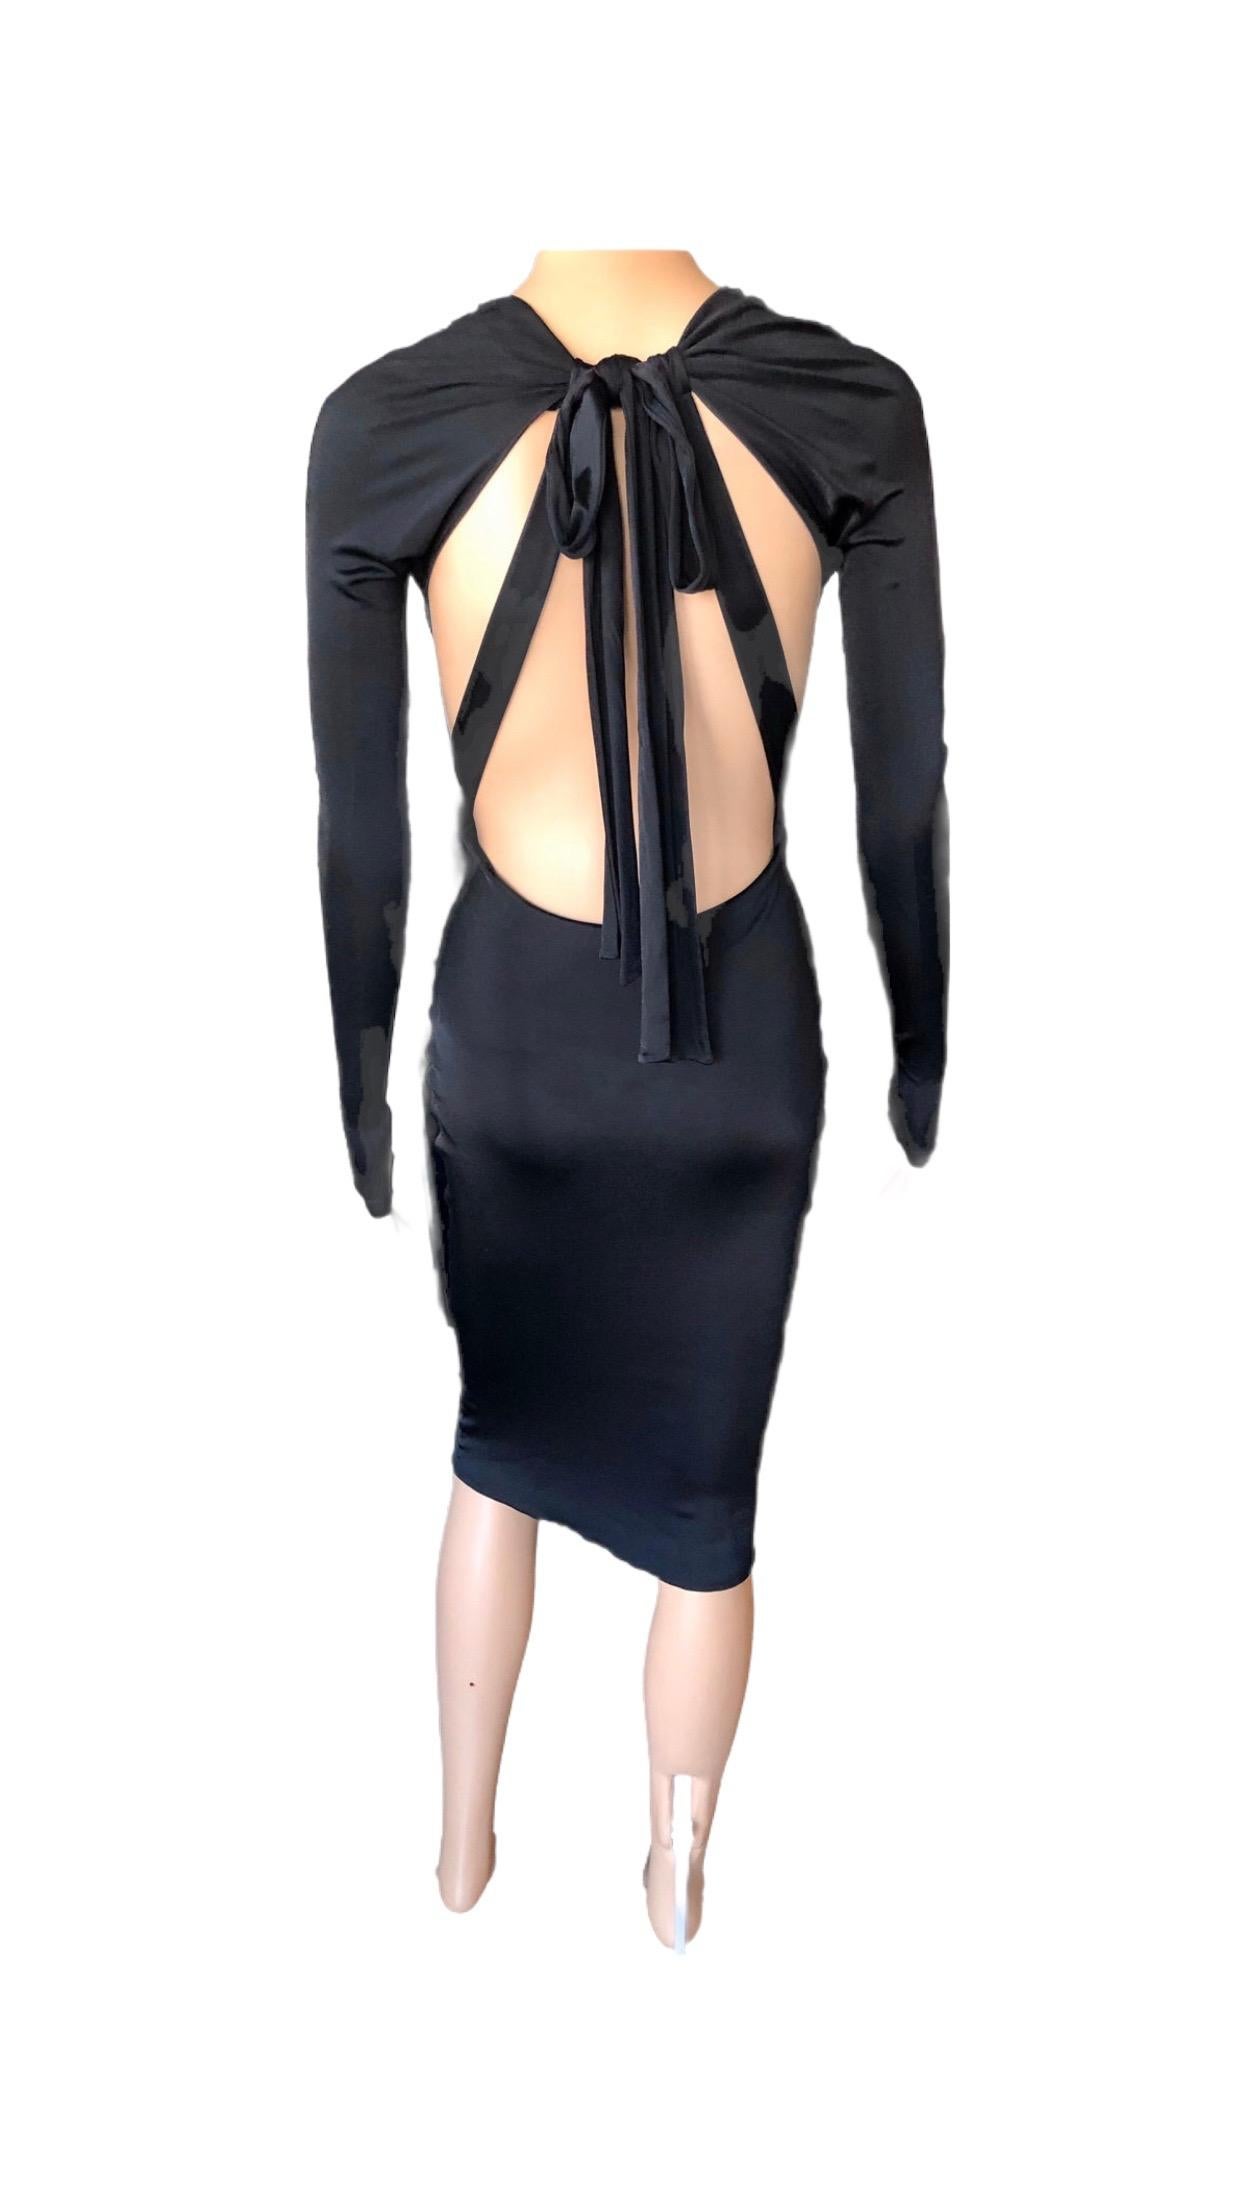 Gucci S/S 2005 Tom Ford Plunging Cutout Backless Bodycon Black Dress en vente 11